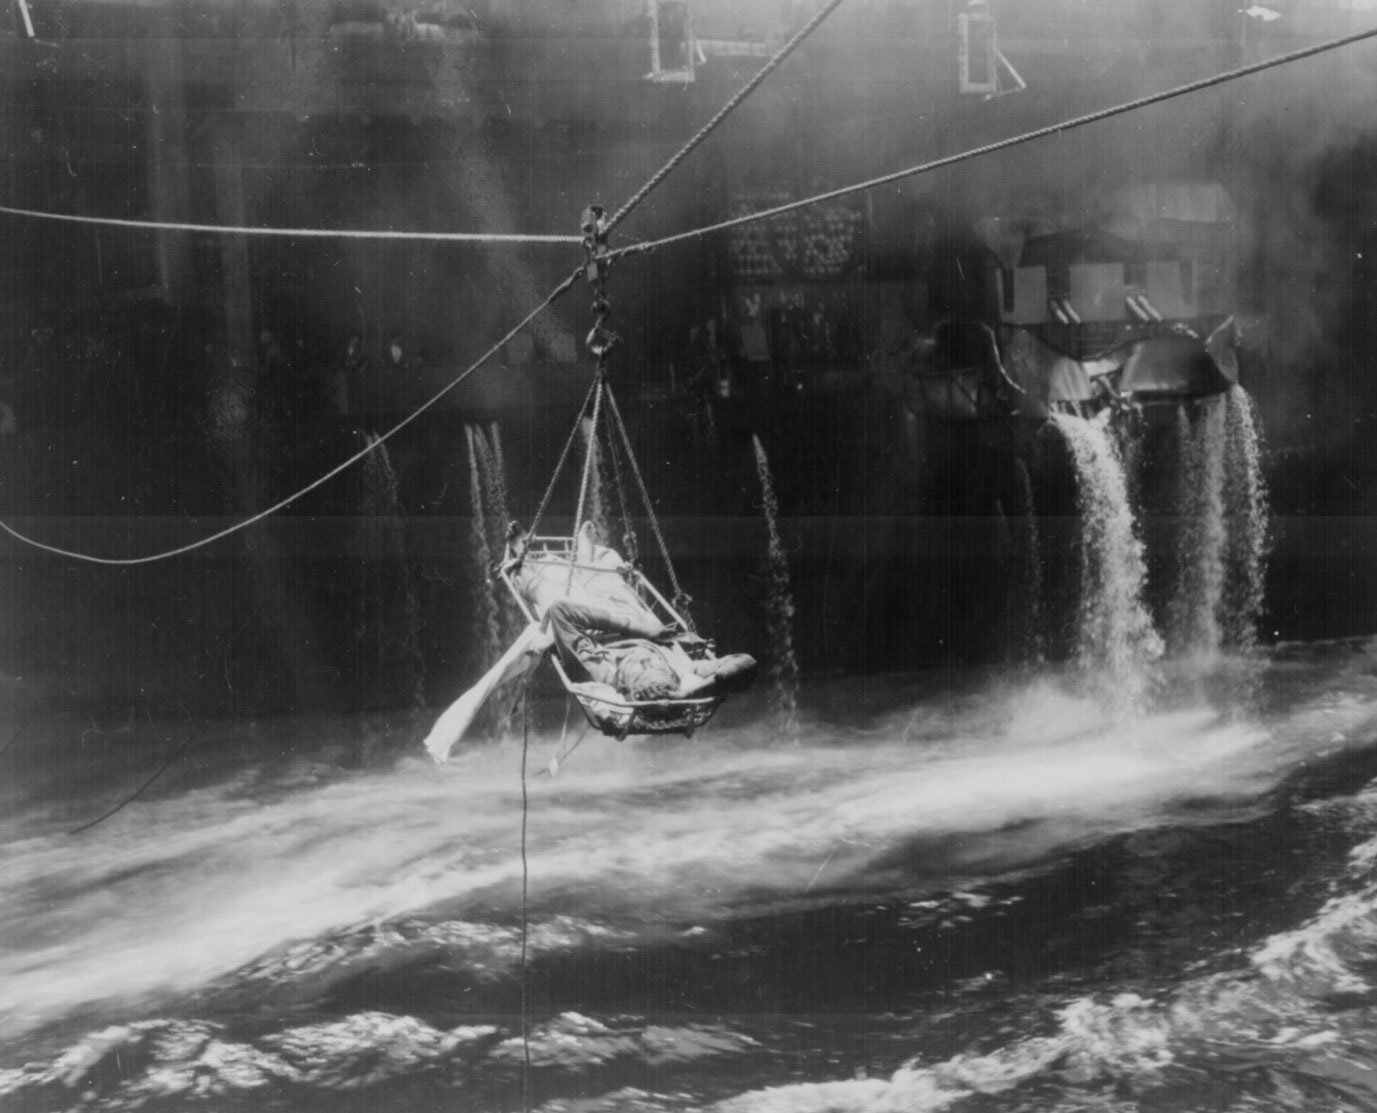 Transfer of wounded from USS Bunker Hill to USS Wilkes Barre, who were injured during fire following suicide dive bombing attack off Okinawa, 11 May 1945